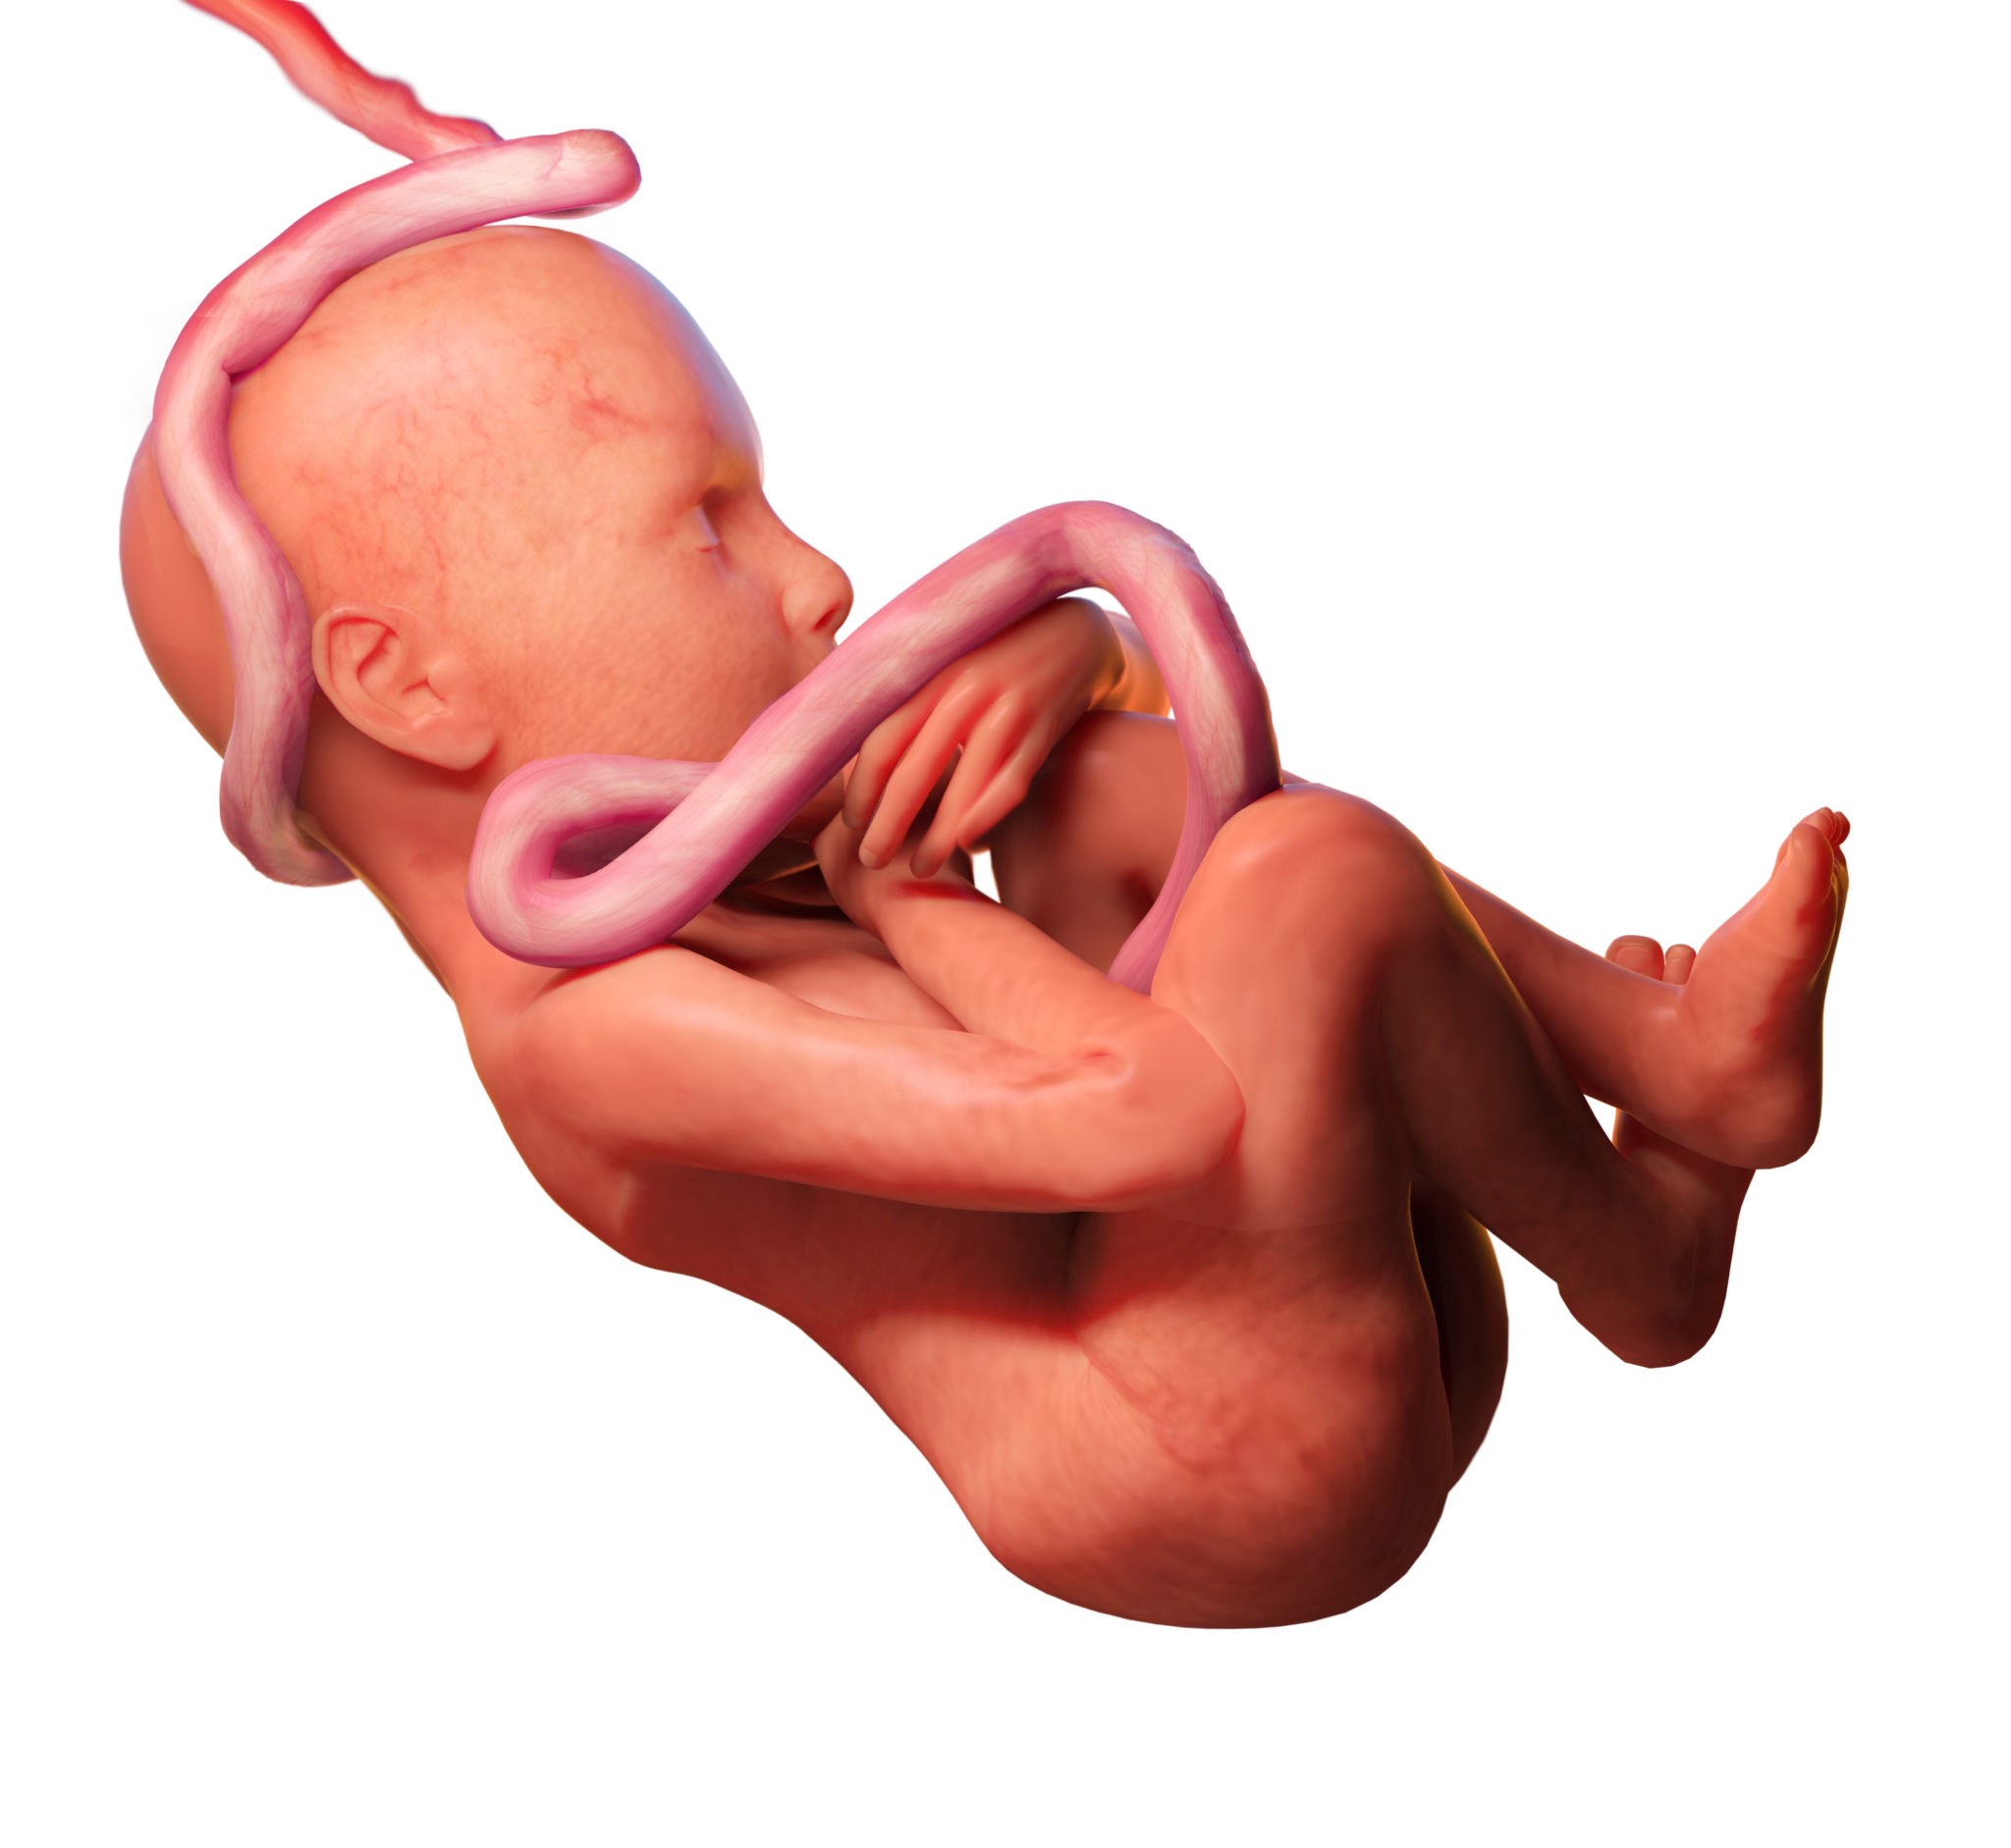 Umbilical Cord Compression and Your Baby's Health